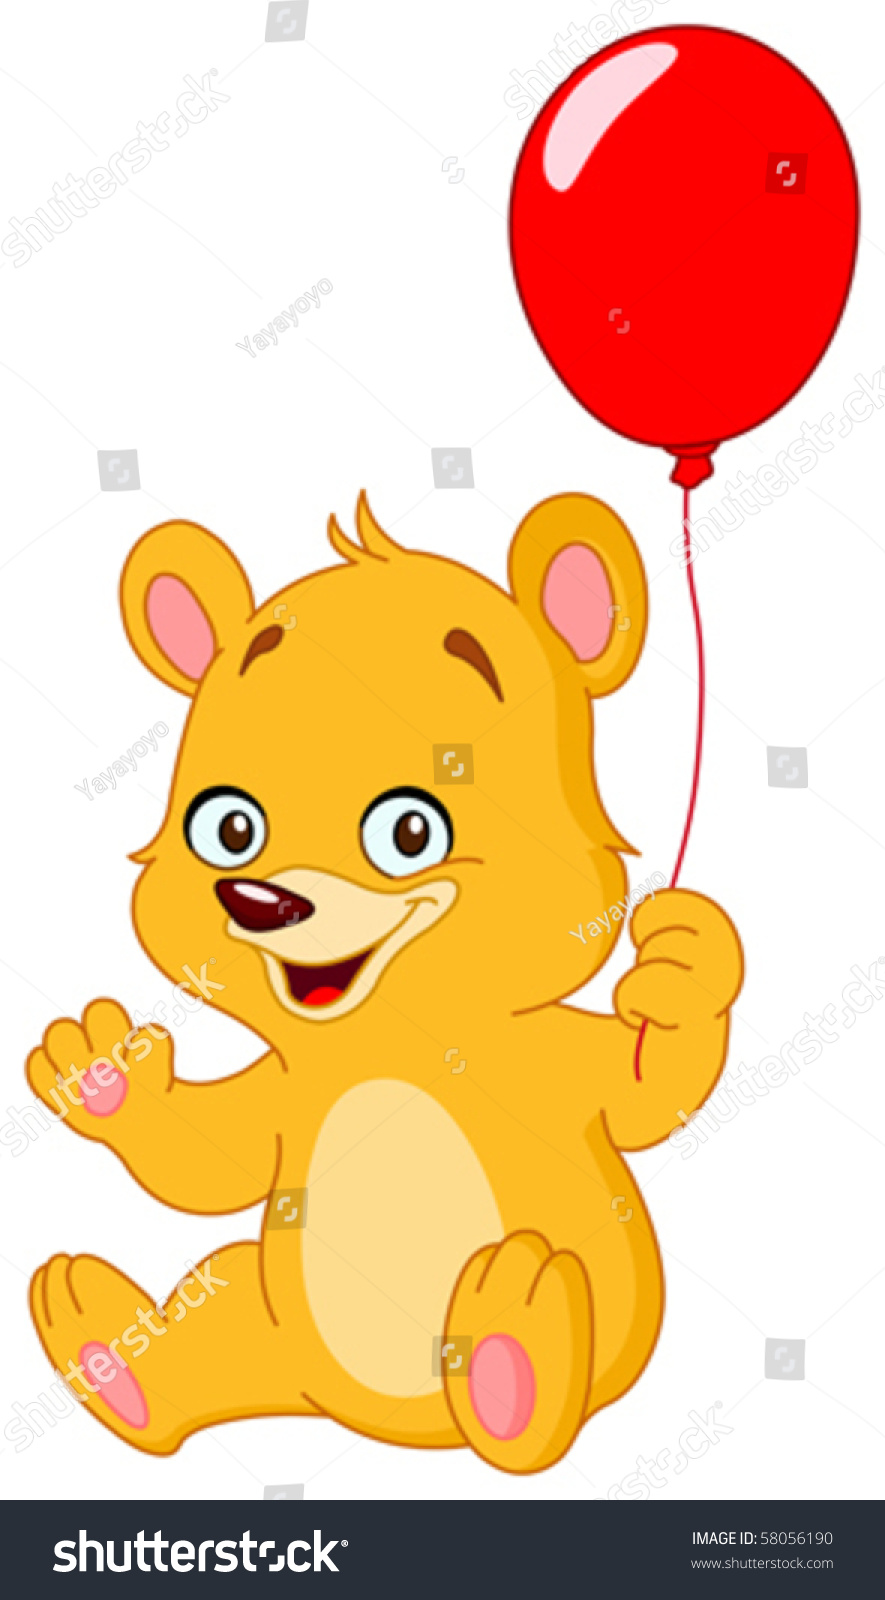 teddy bear with balloons free clipart - photo #42